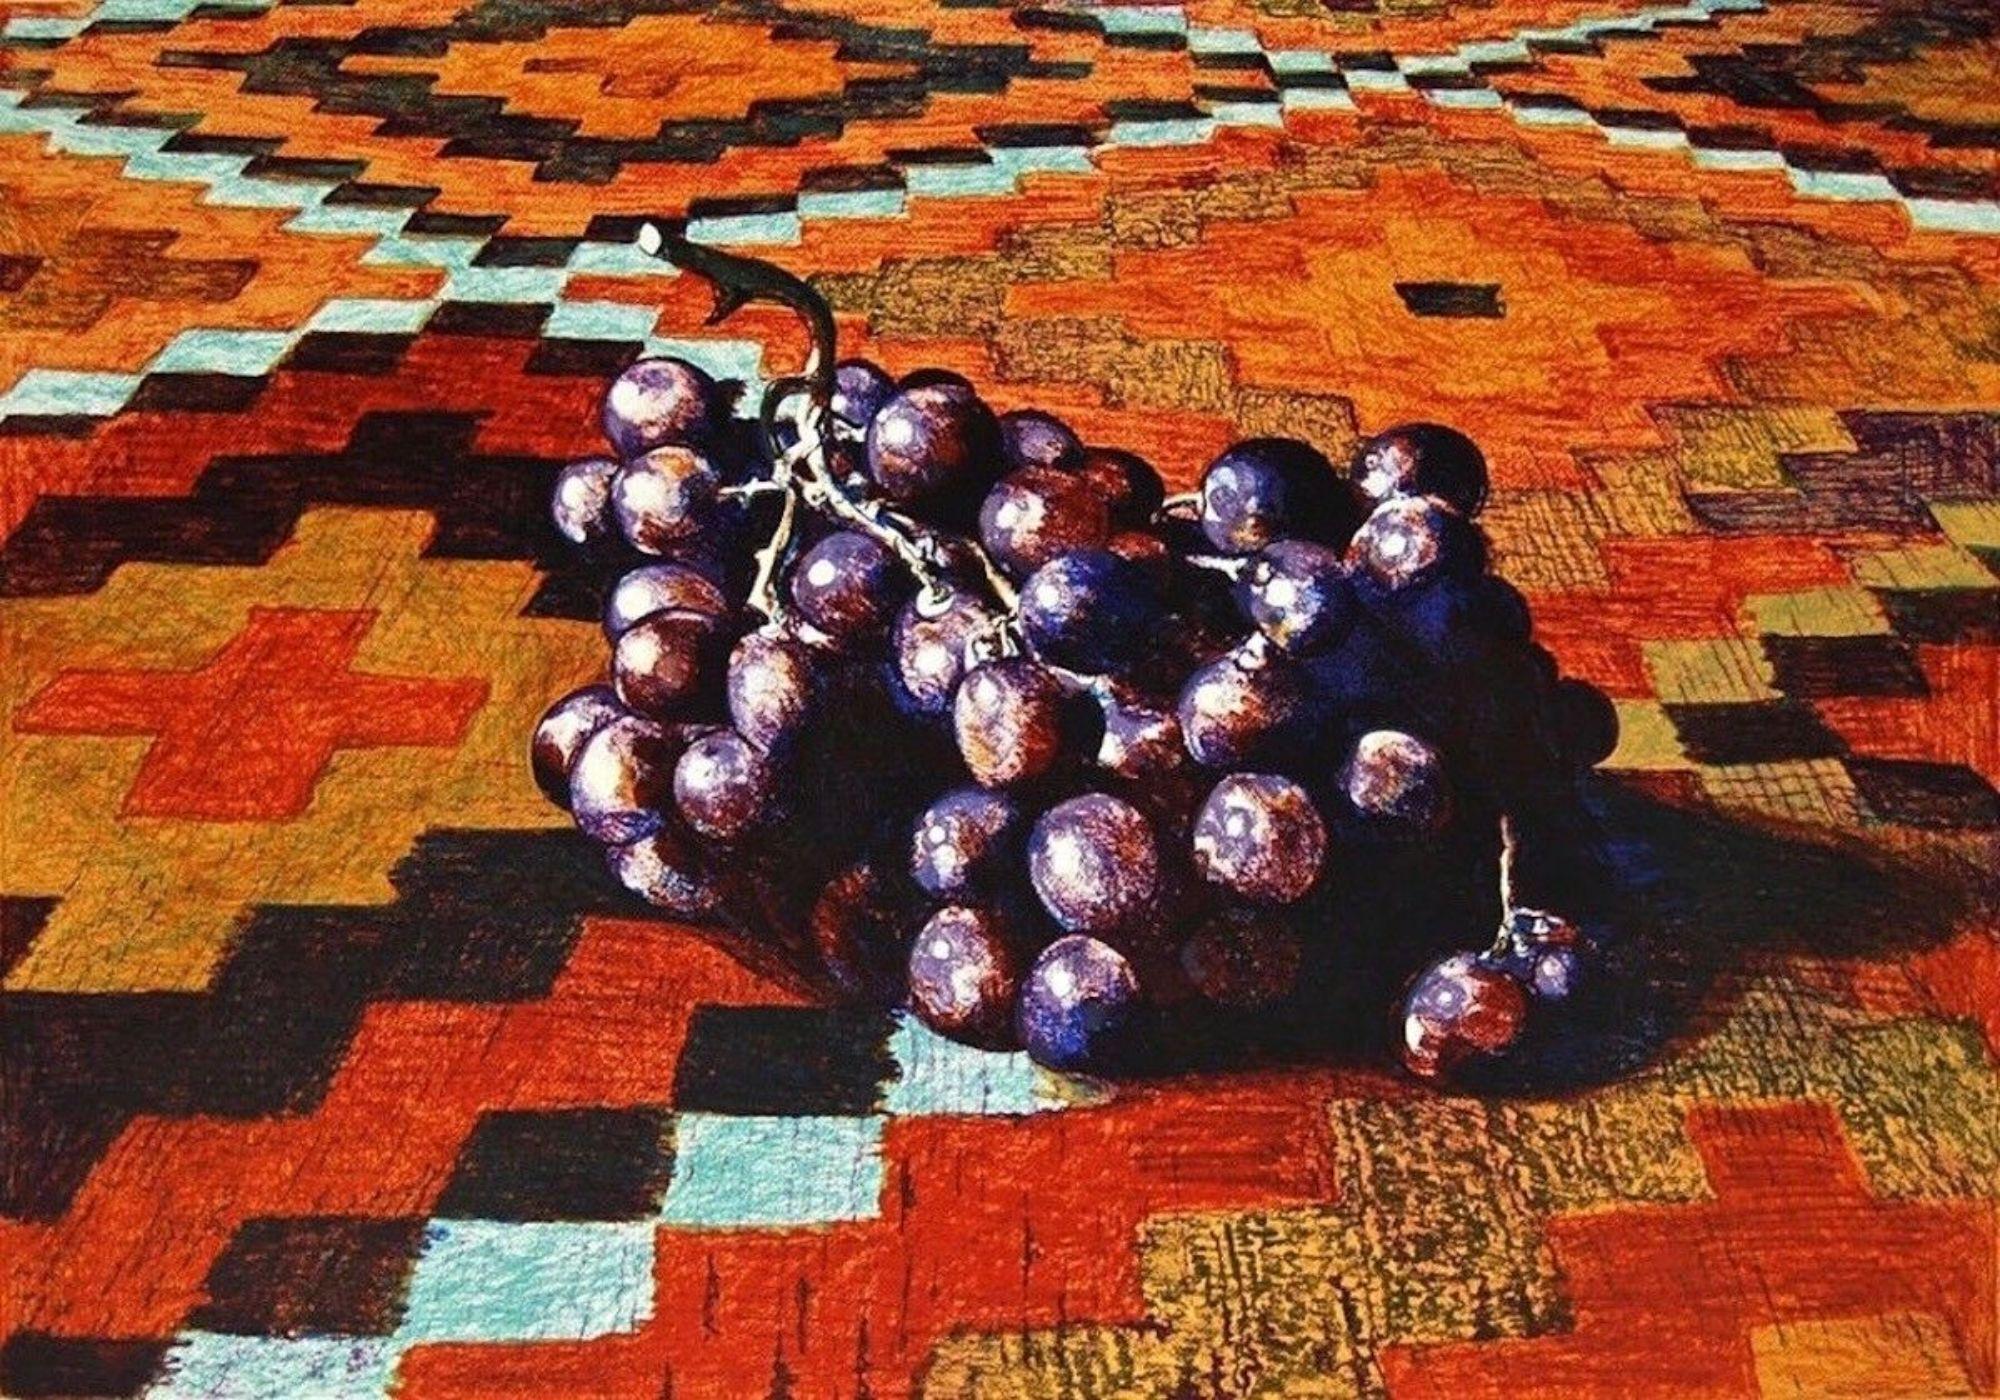 Grapes On Rug, Limited Edition Lithograph, Lowell Nesbitt 